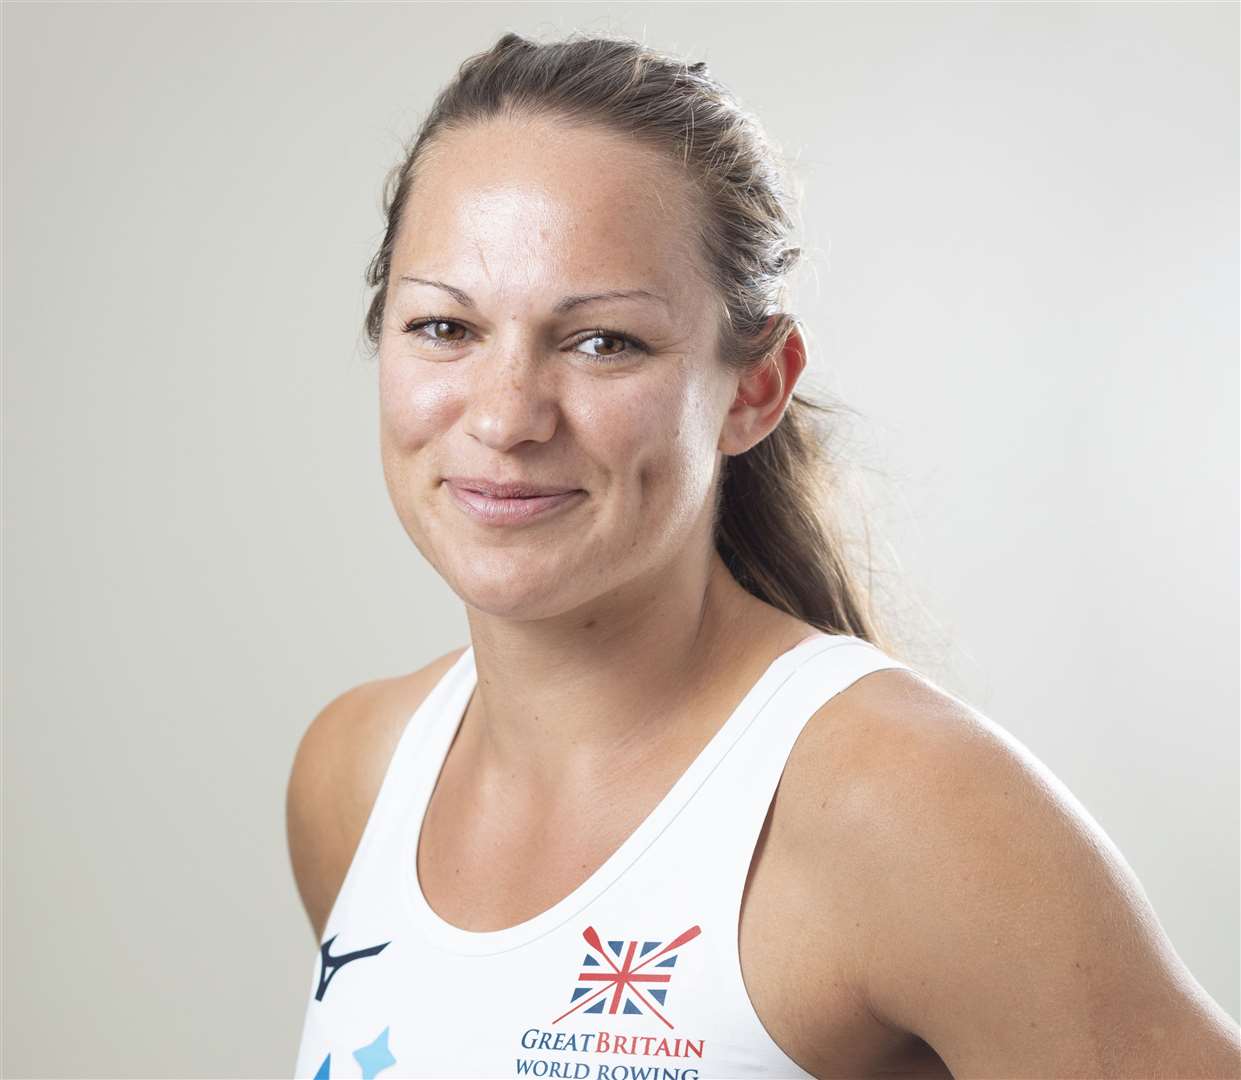 Rochester's Sara Parfett in GB Rowing kit Picture: British Rowing